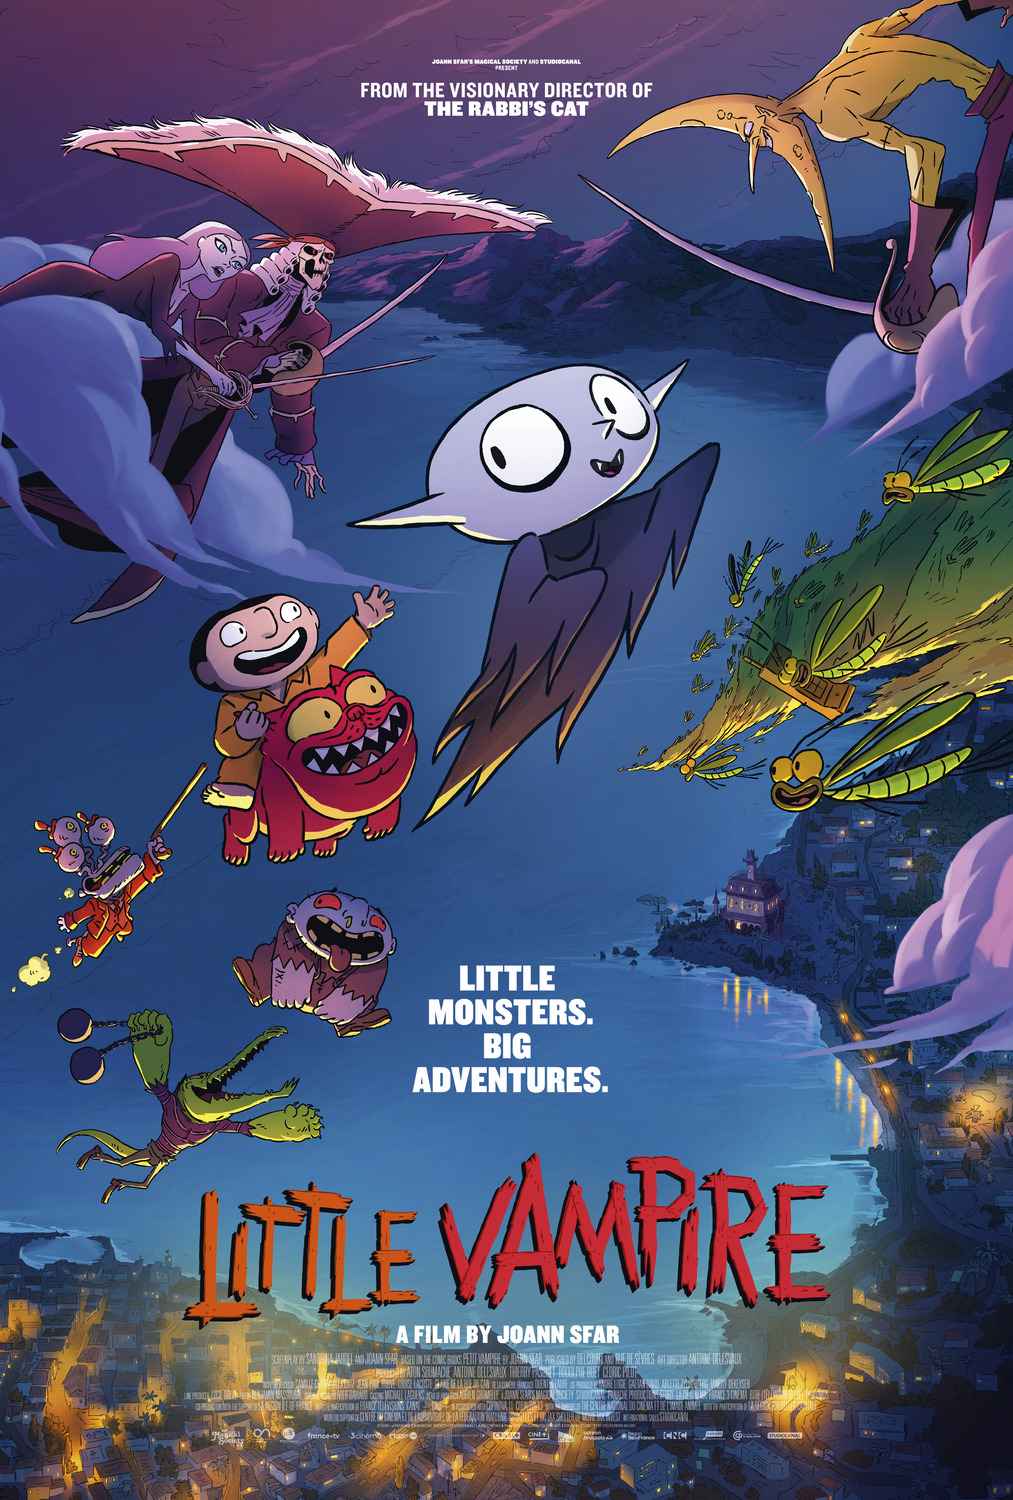 Extra Large Movie Poster Image for Petit vampire (#3 of 3)